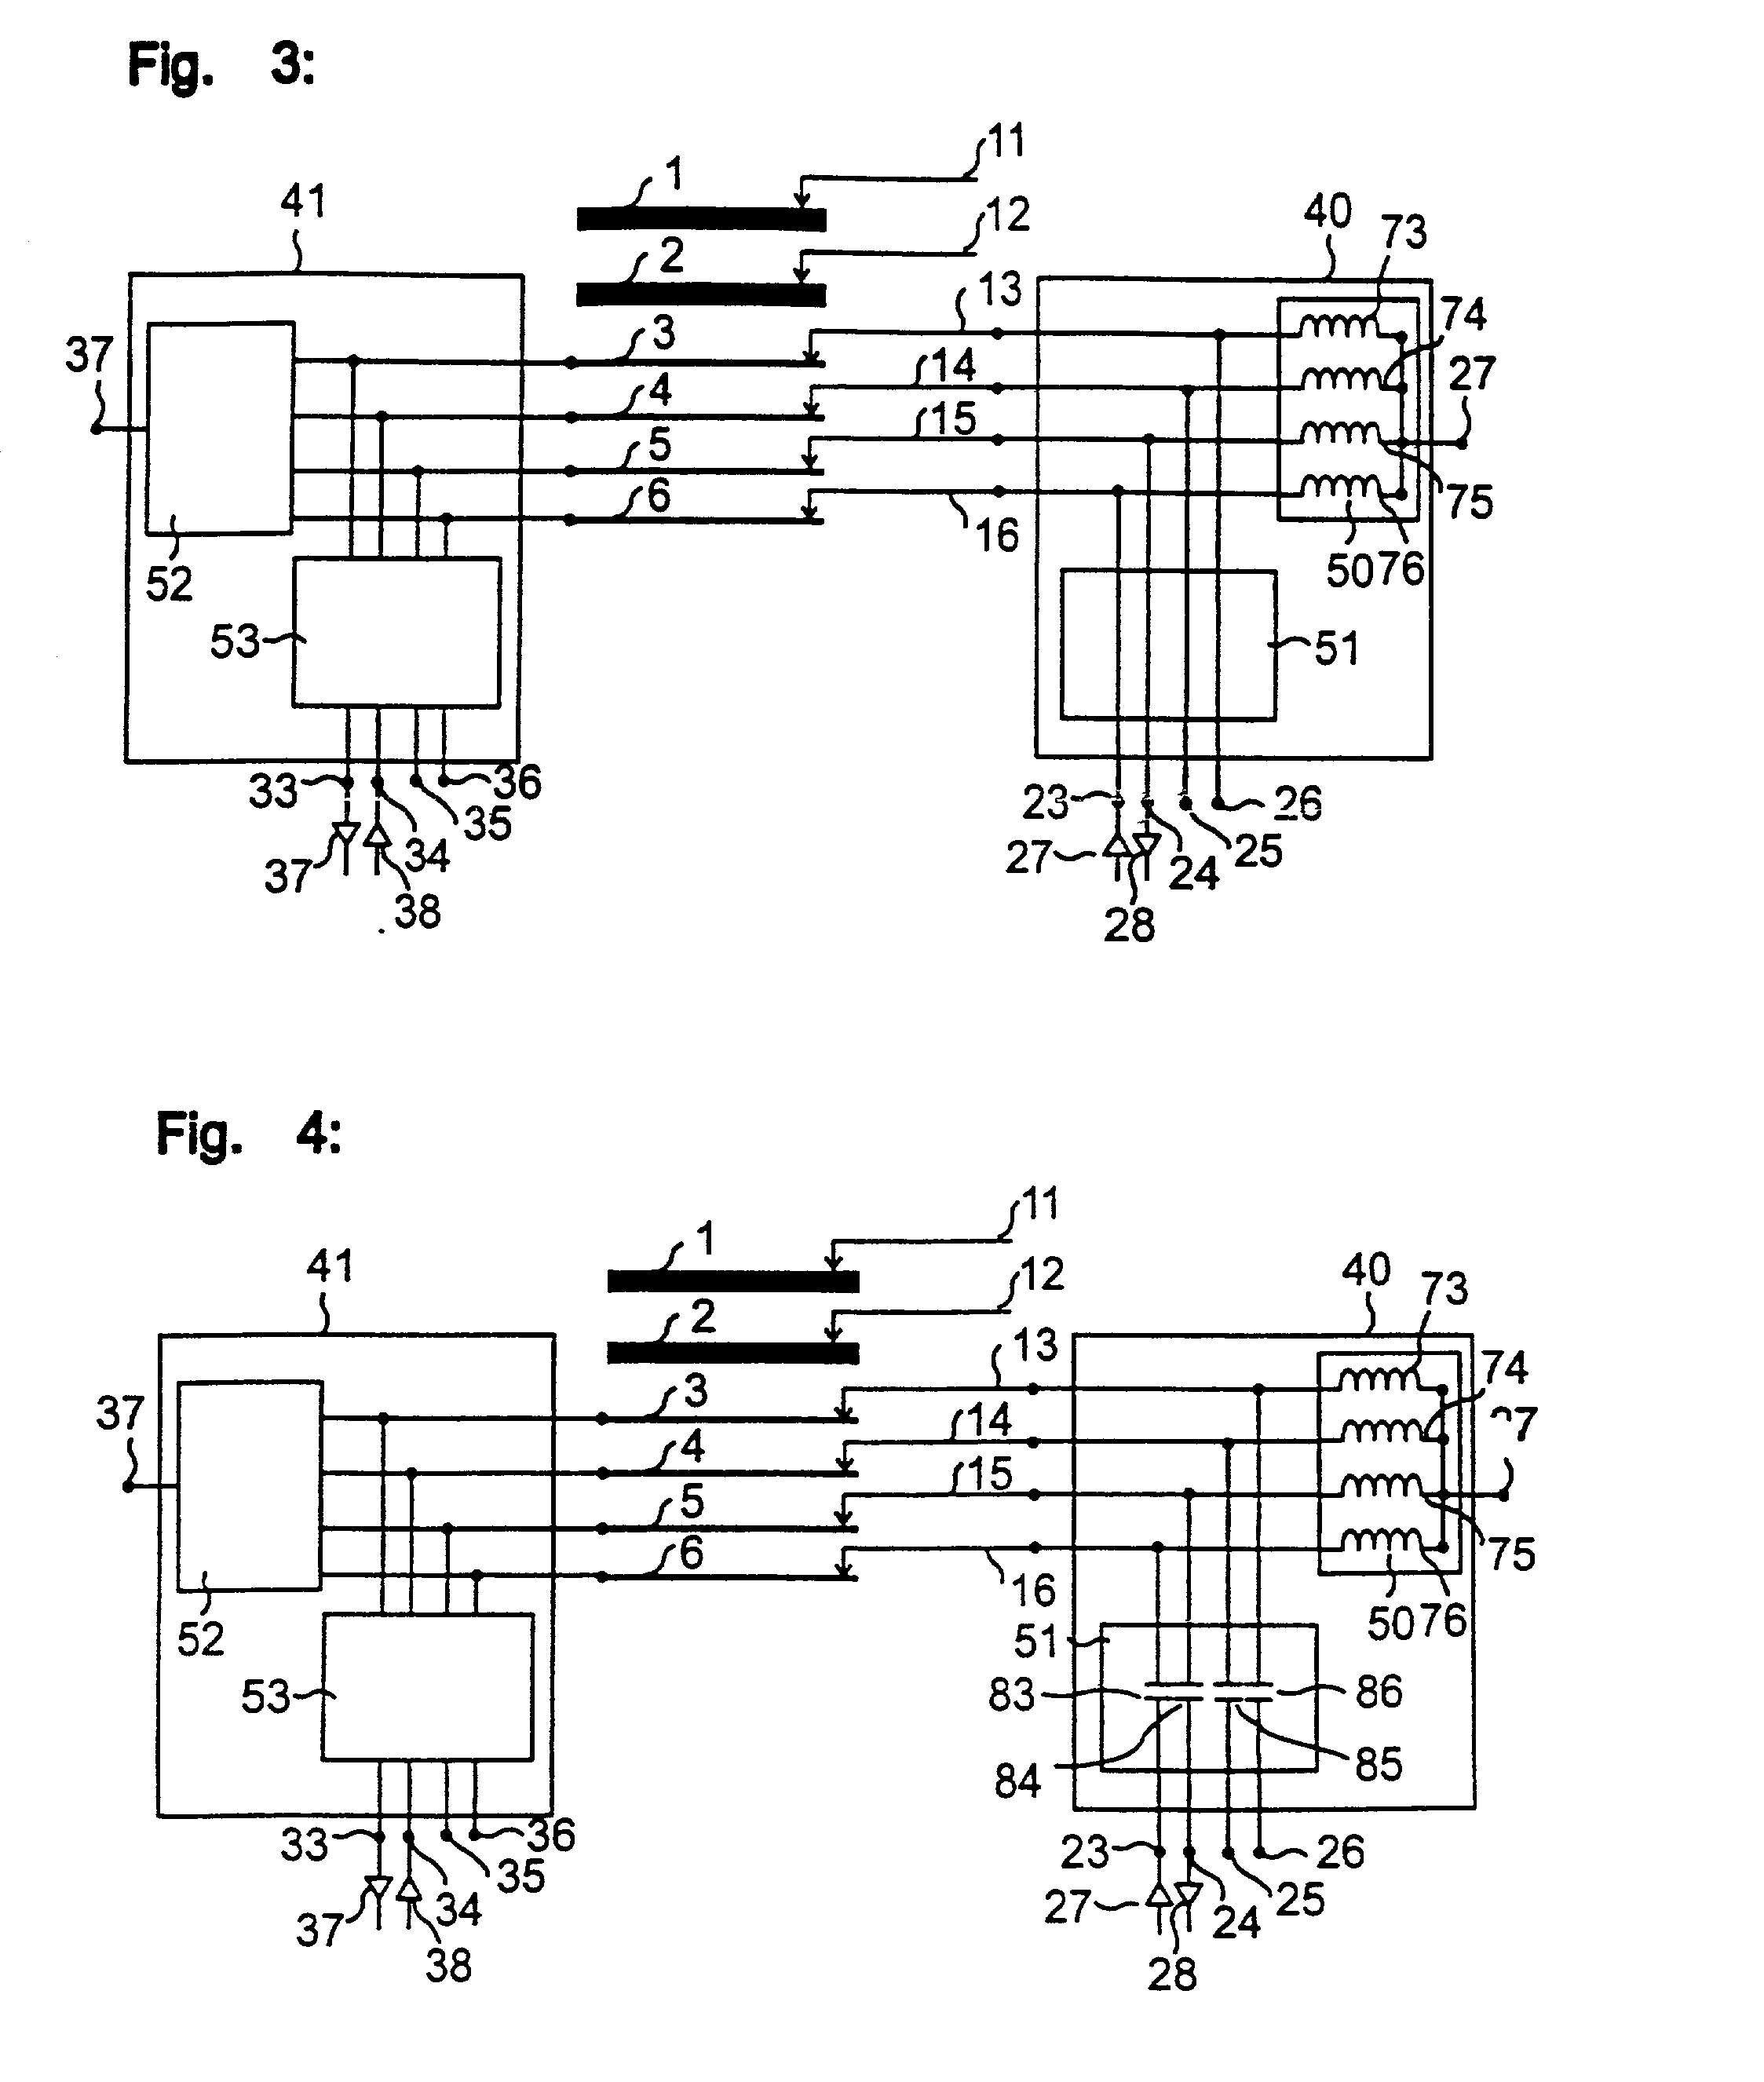 Array for the transmission of electrical signals between moving units at a reduced number of paths